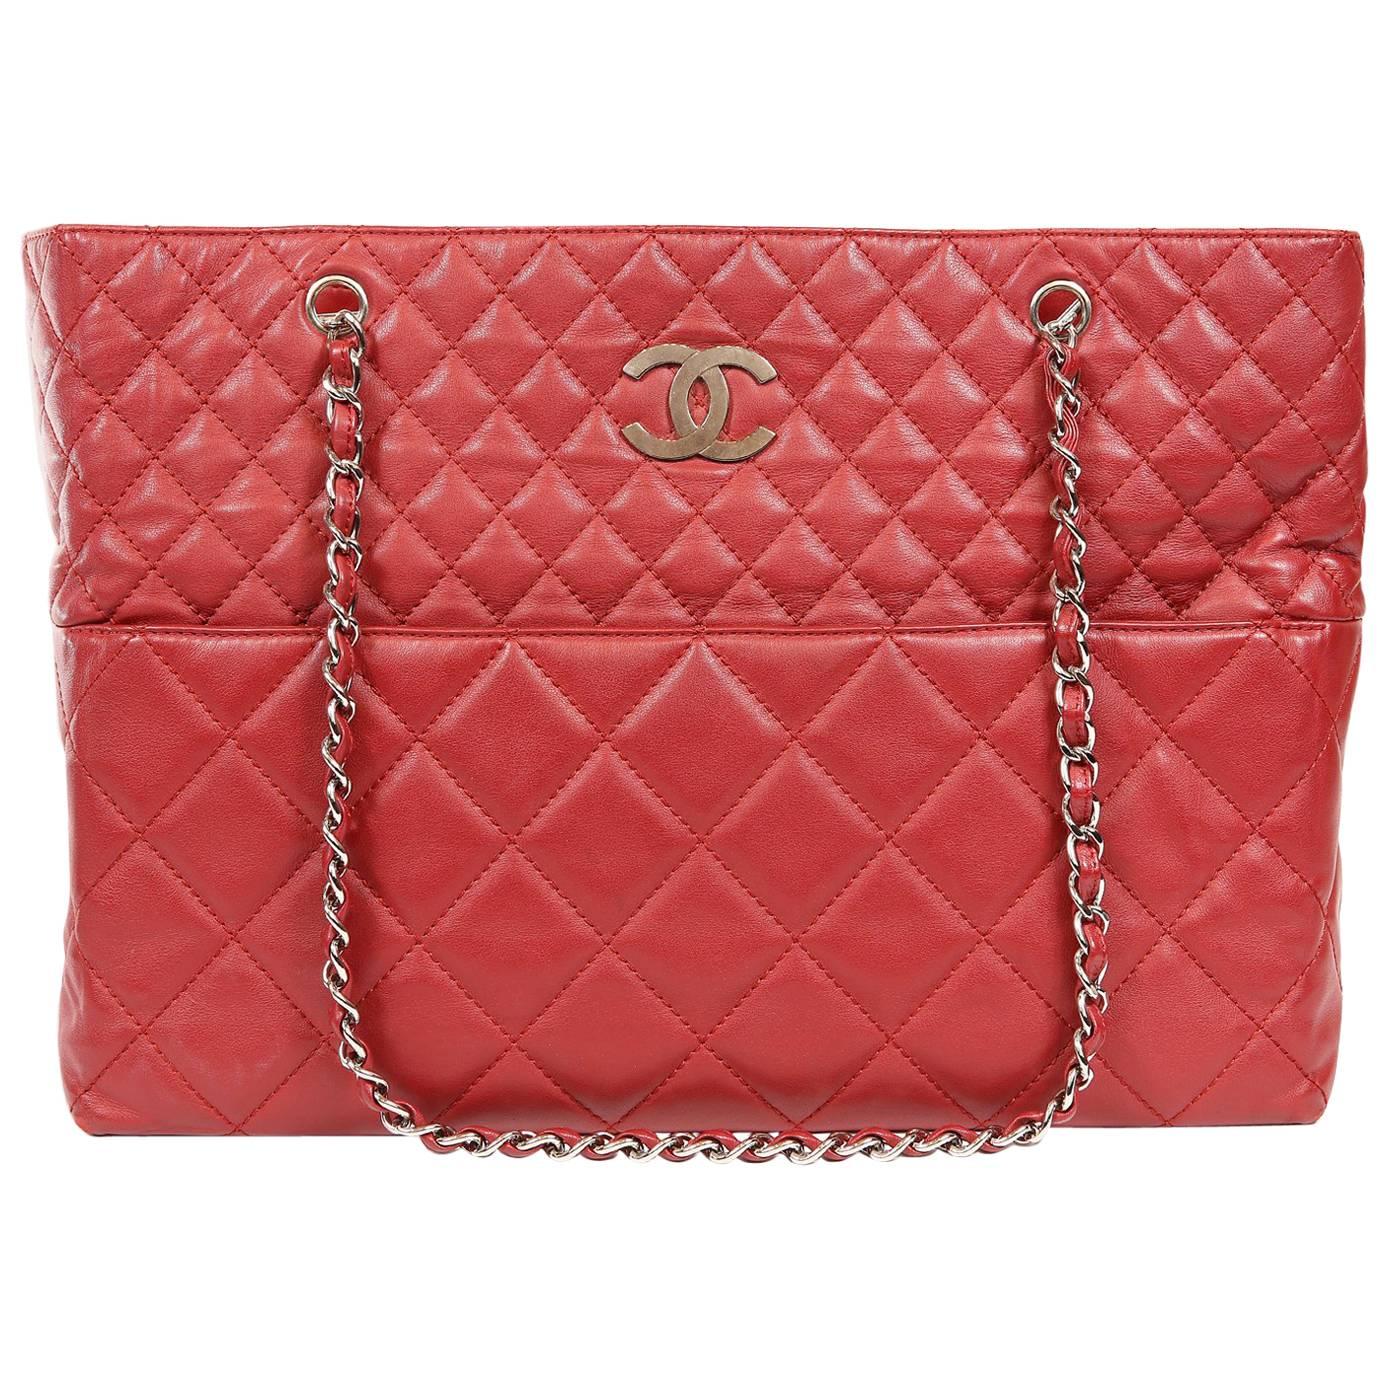 Chanel Red Leather XXL Tote Bag